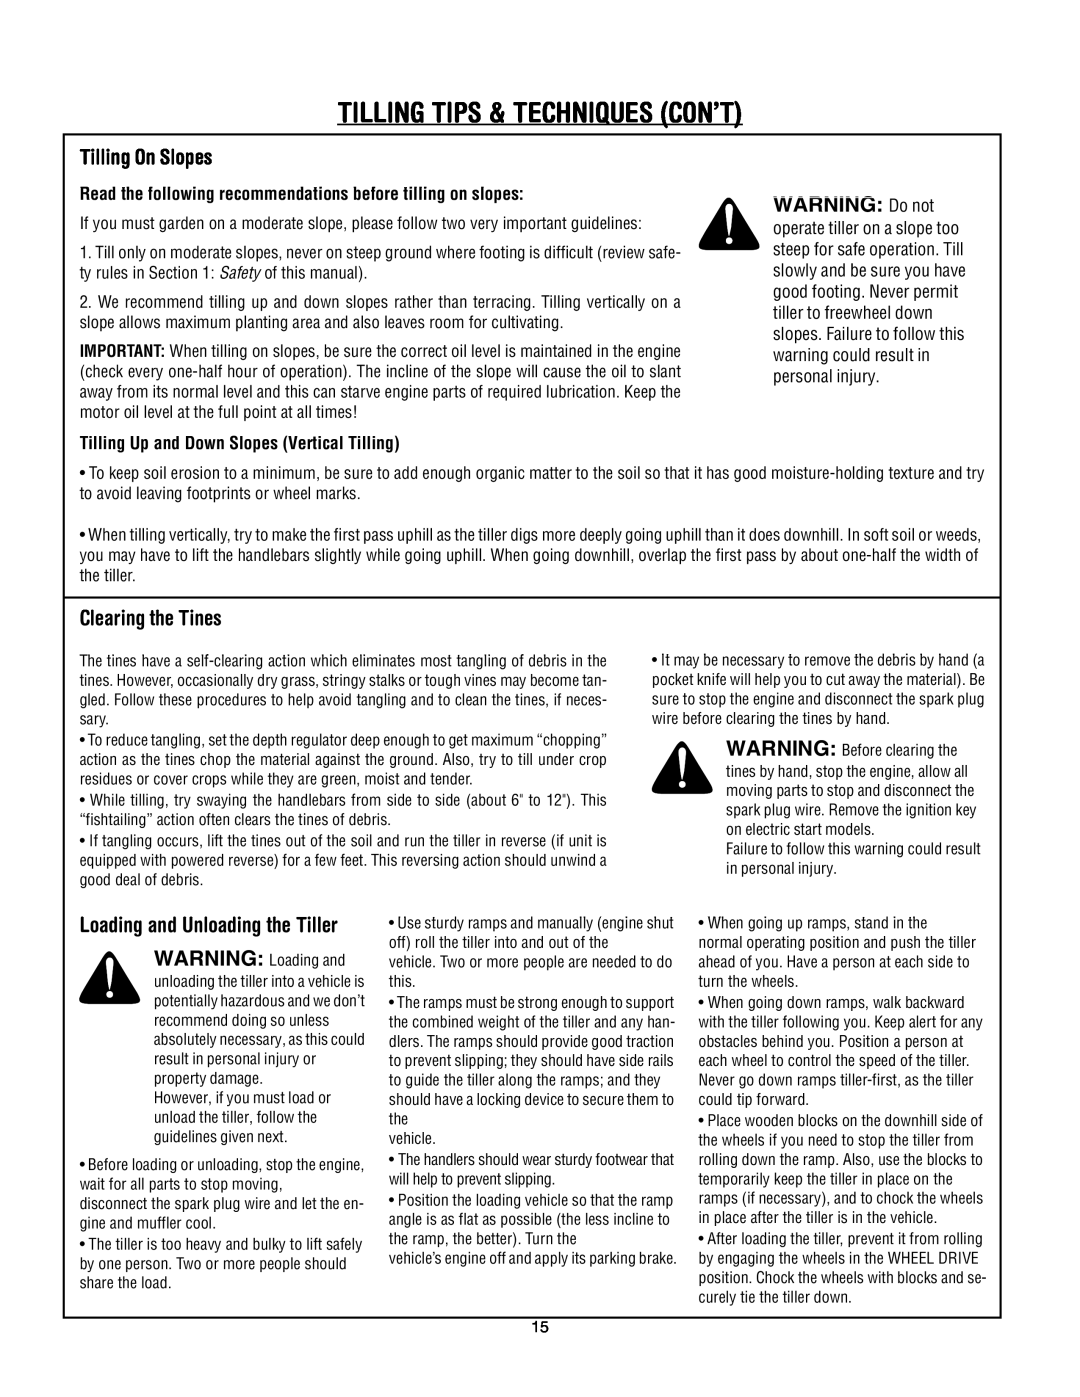 Troy-Bilt 643B Super Bronco manual Tilling Tips & Techniques Con’T, Tilling On Slopes, WARNING Do not, Clearing the Tines 